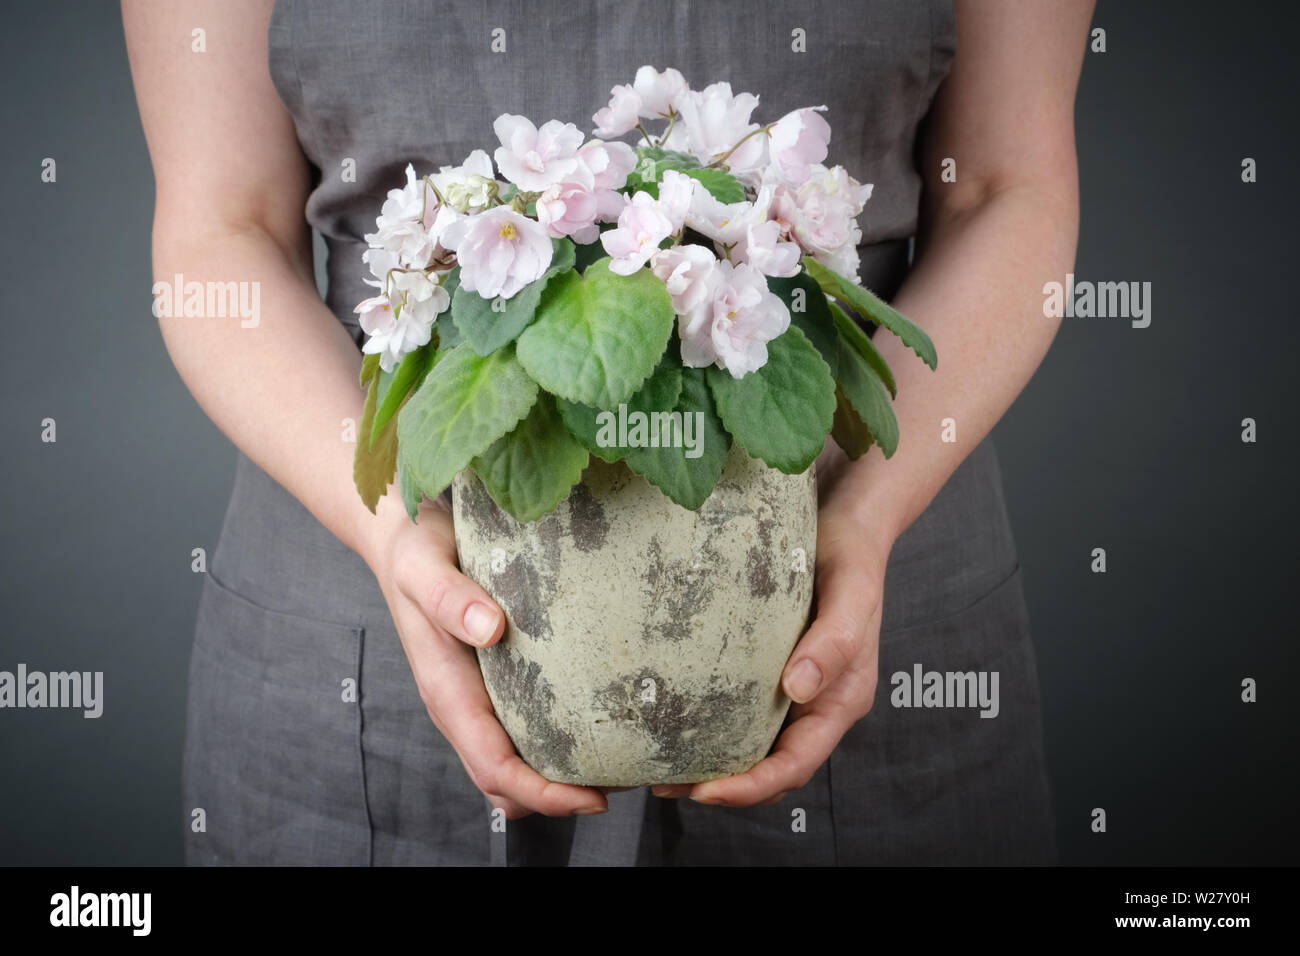 Woman holding a Potted Saintpaulia violet flower in her hands. Stock Photo